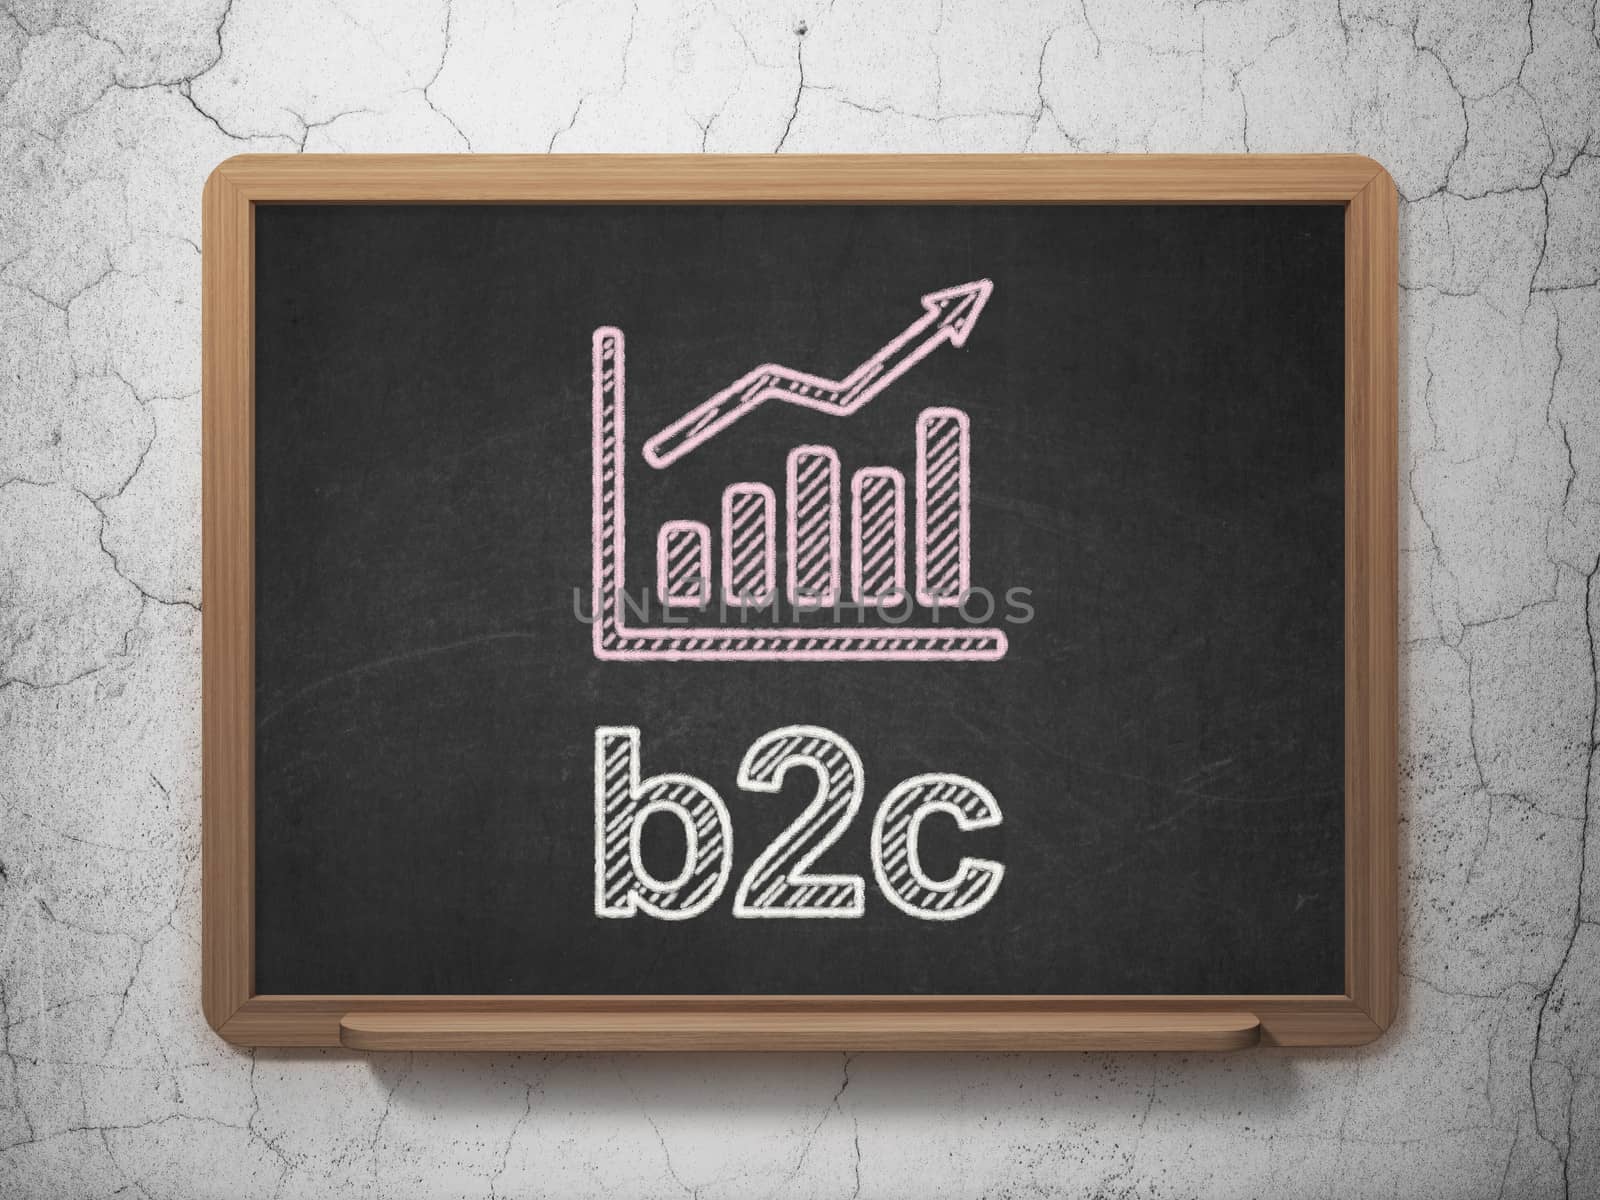 Business concept: Growth Graph icon and text B2c on Black chalkboard on grunge wall background, 3d render